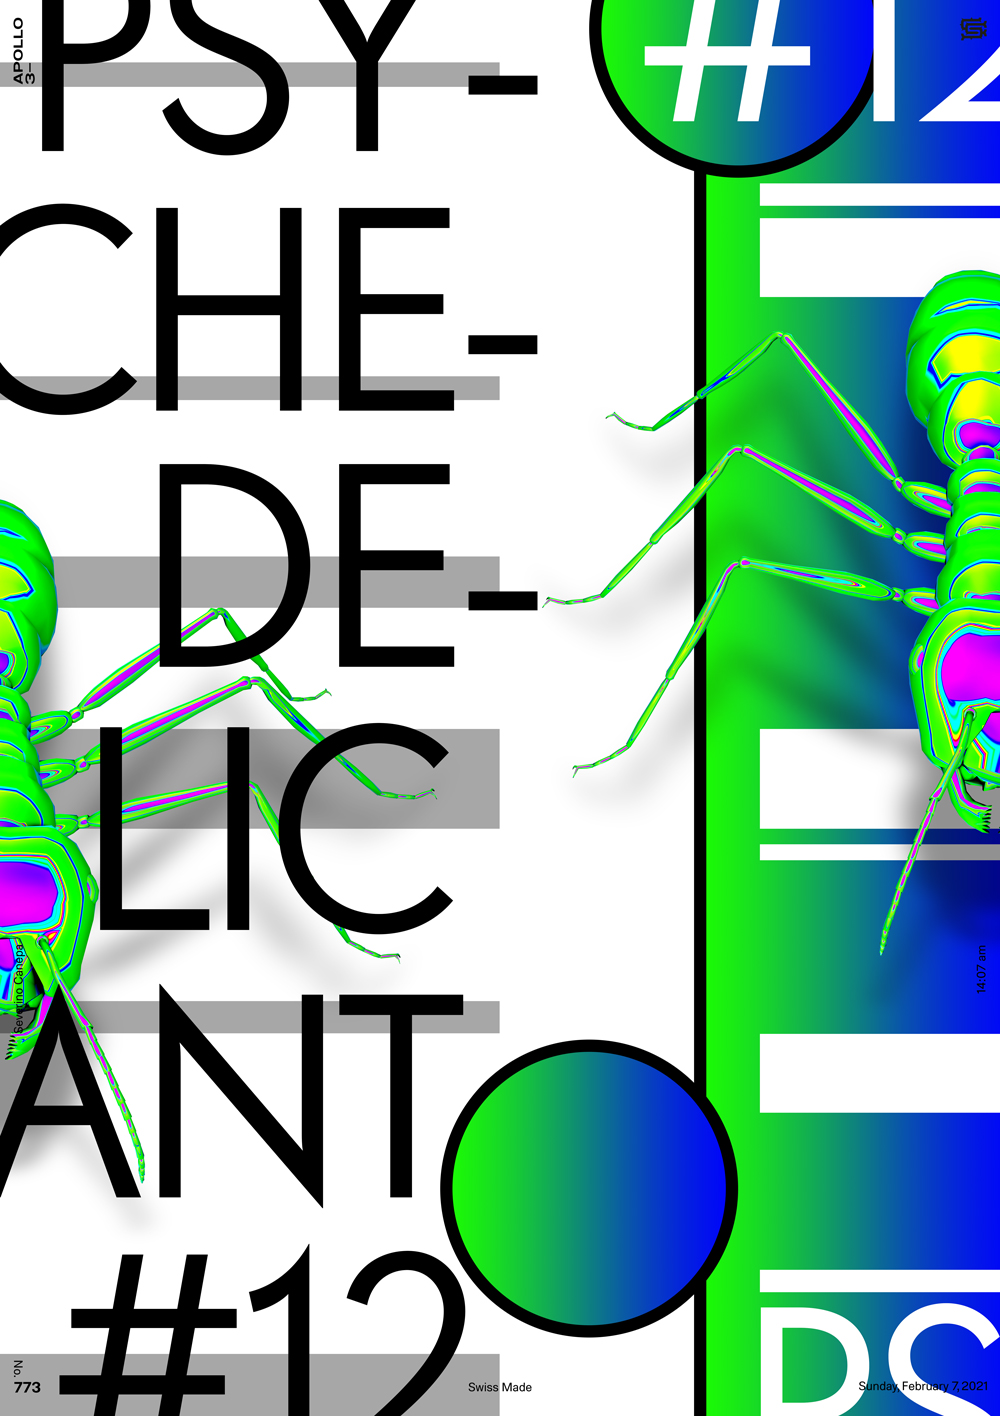 Visual creation using large typeface, geometric shapes with grey or gradient, and the 3D psychedelic ant